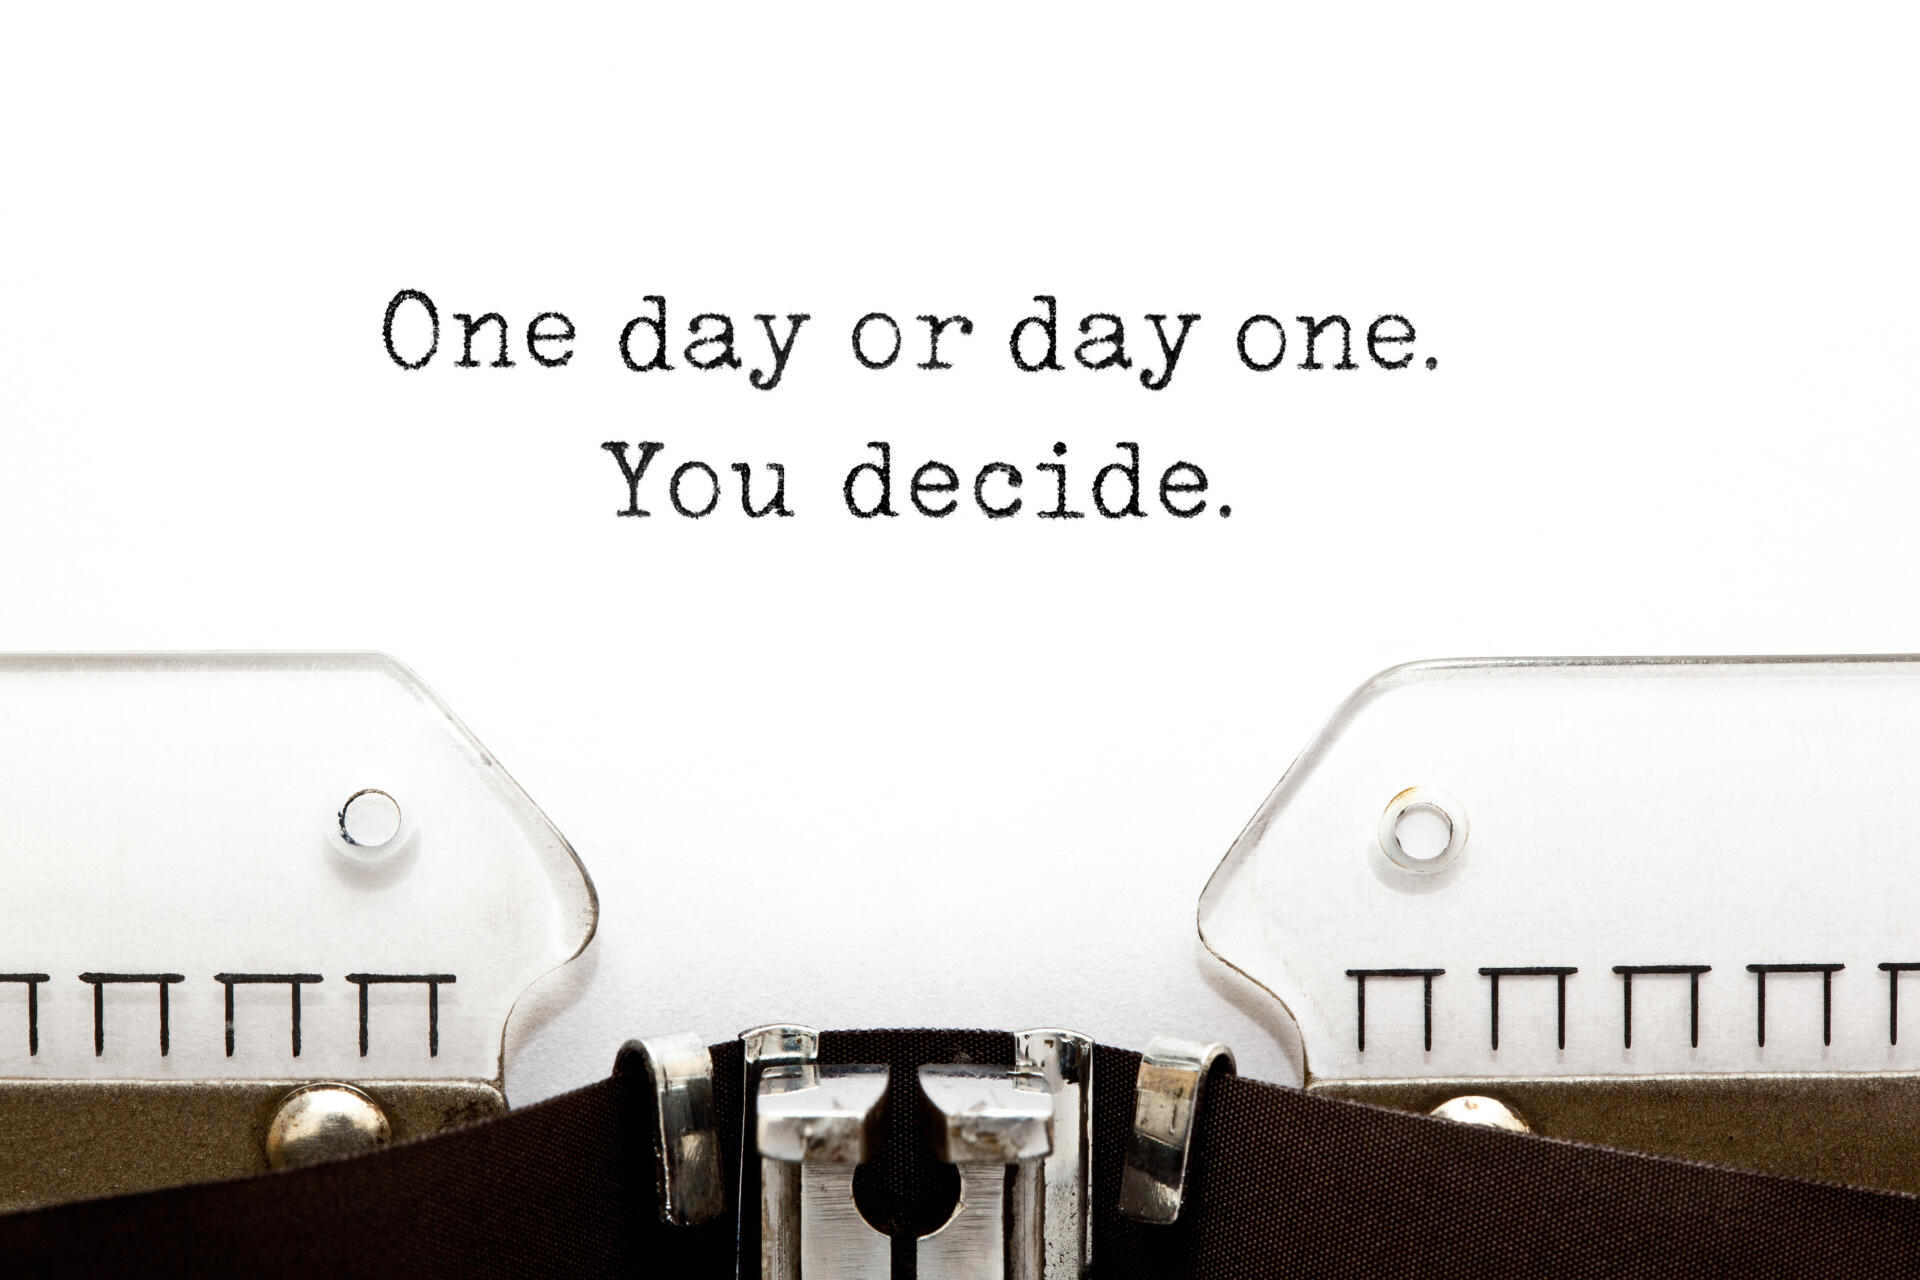 One day or day one. You decide. printed on old typewriter.